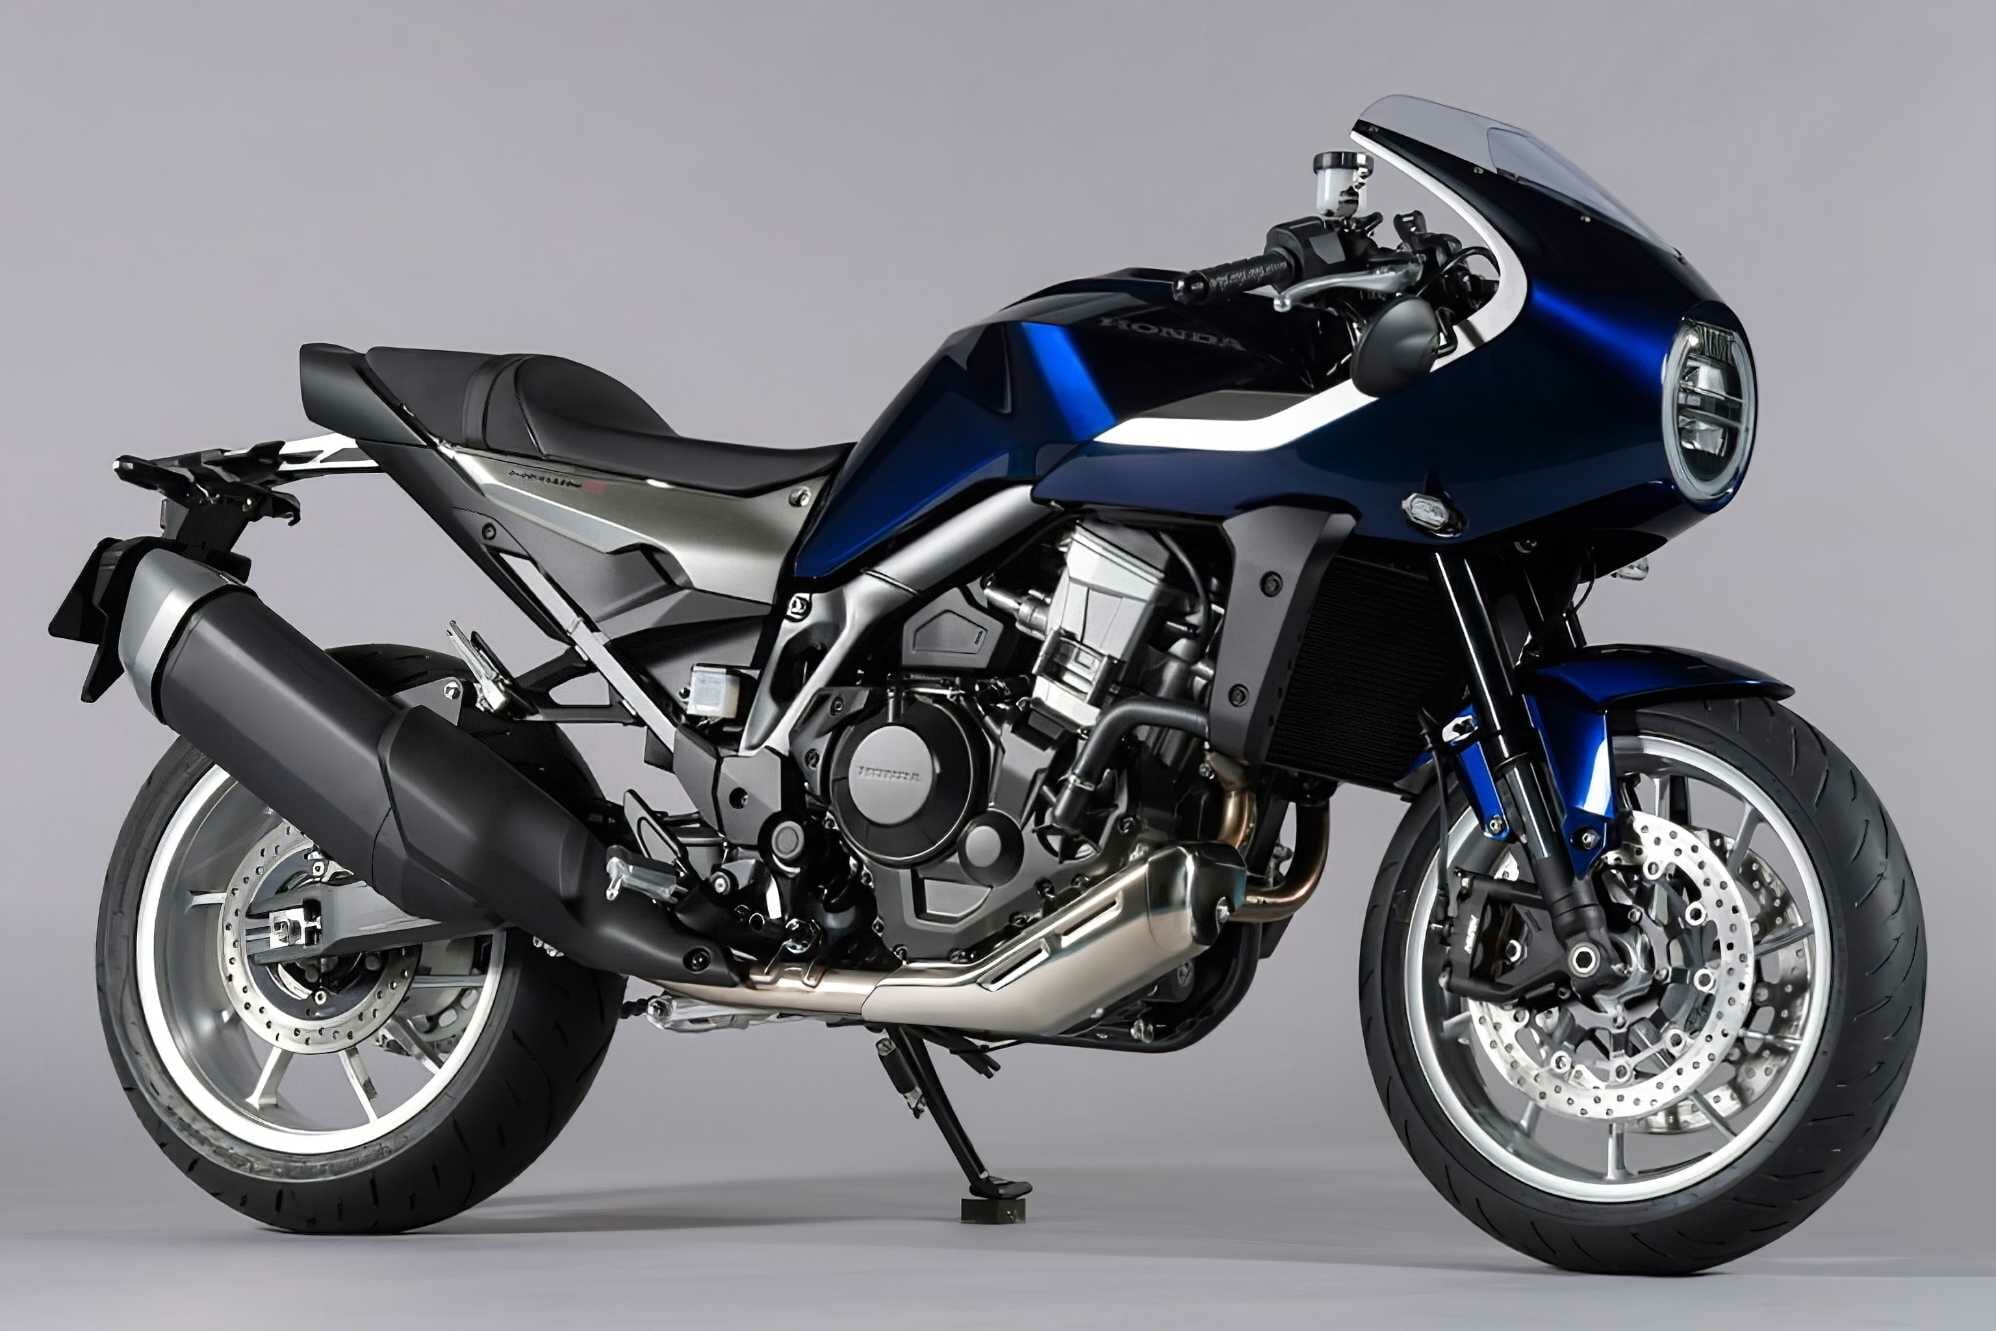 Honda Hawk 11 presented
- also in the MOTORCYCLES.NEWS APP